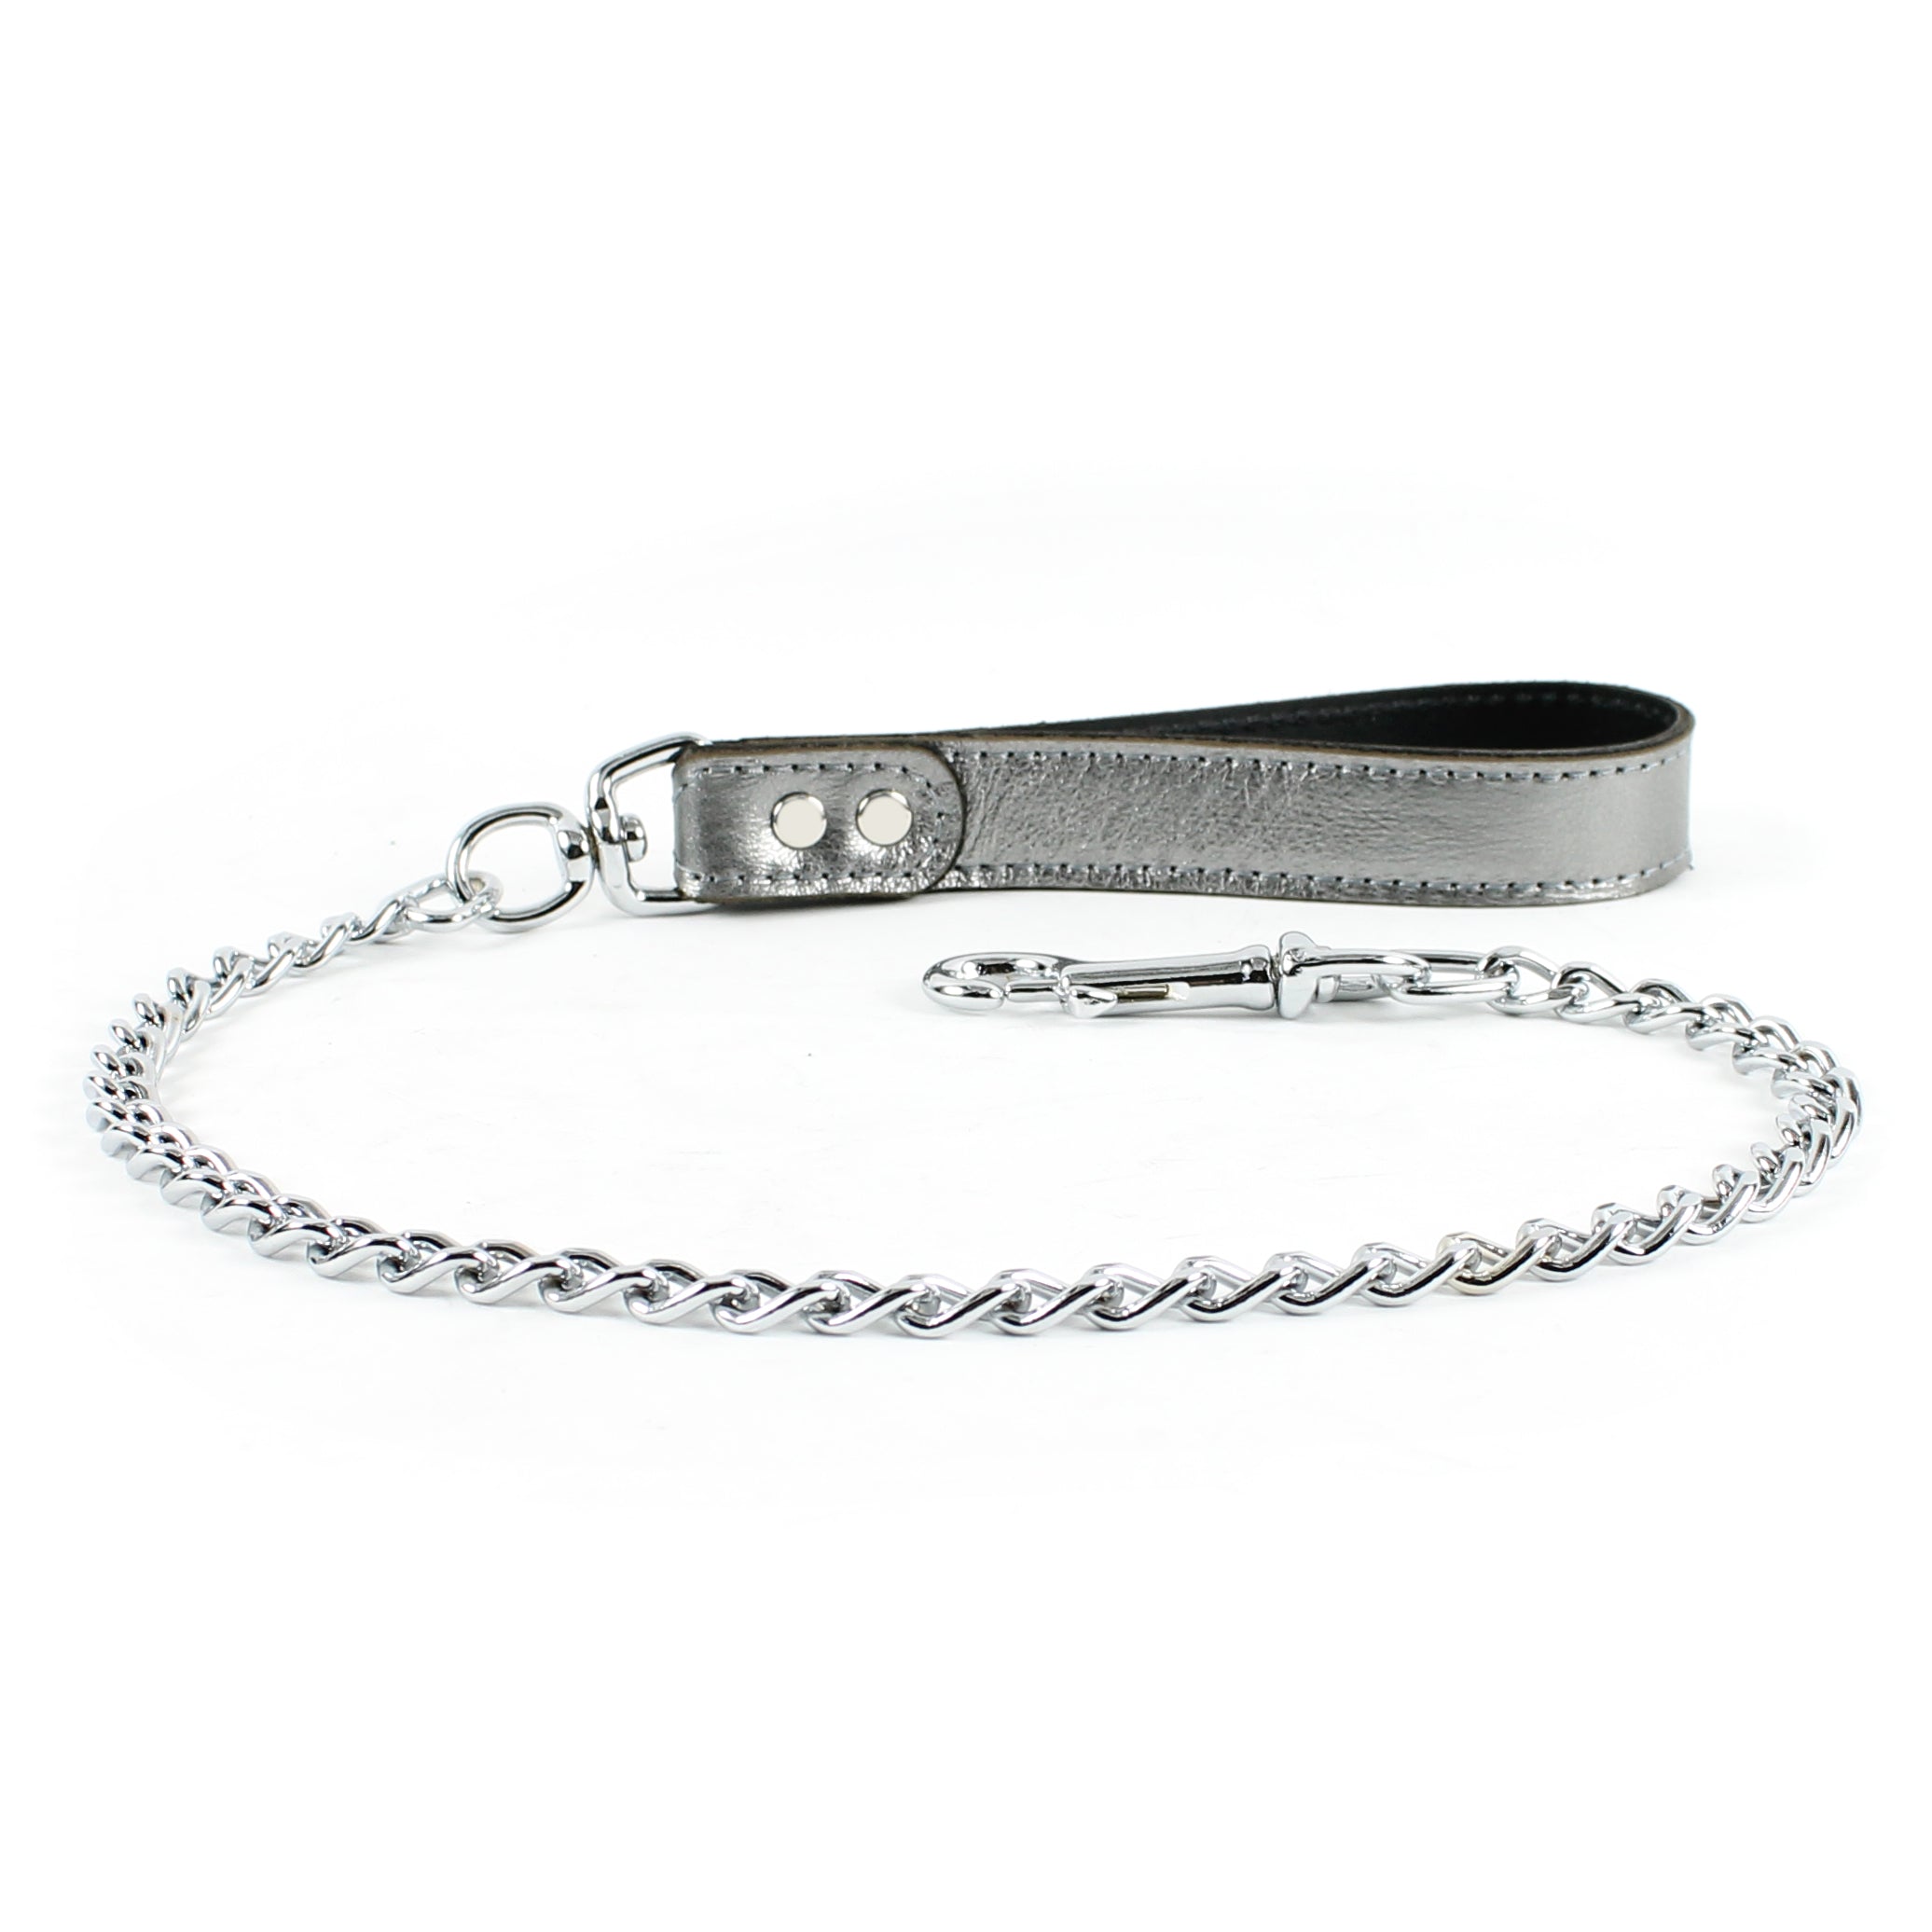 Gaius High-End Nickel-Plated Chain Pet Leash with Leather Handle